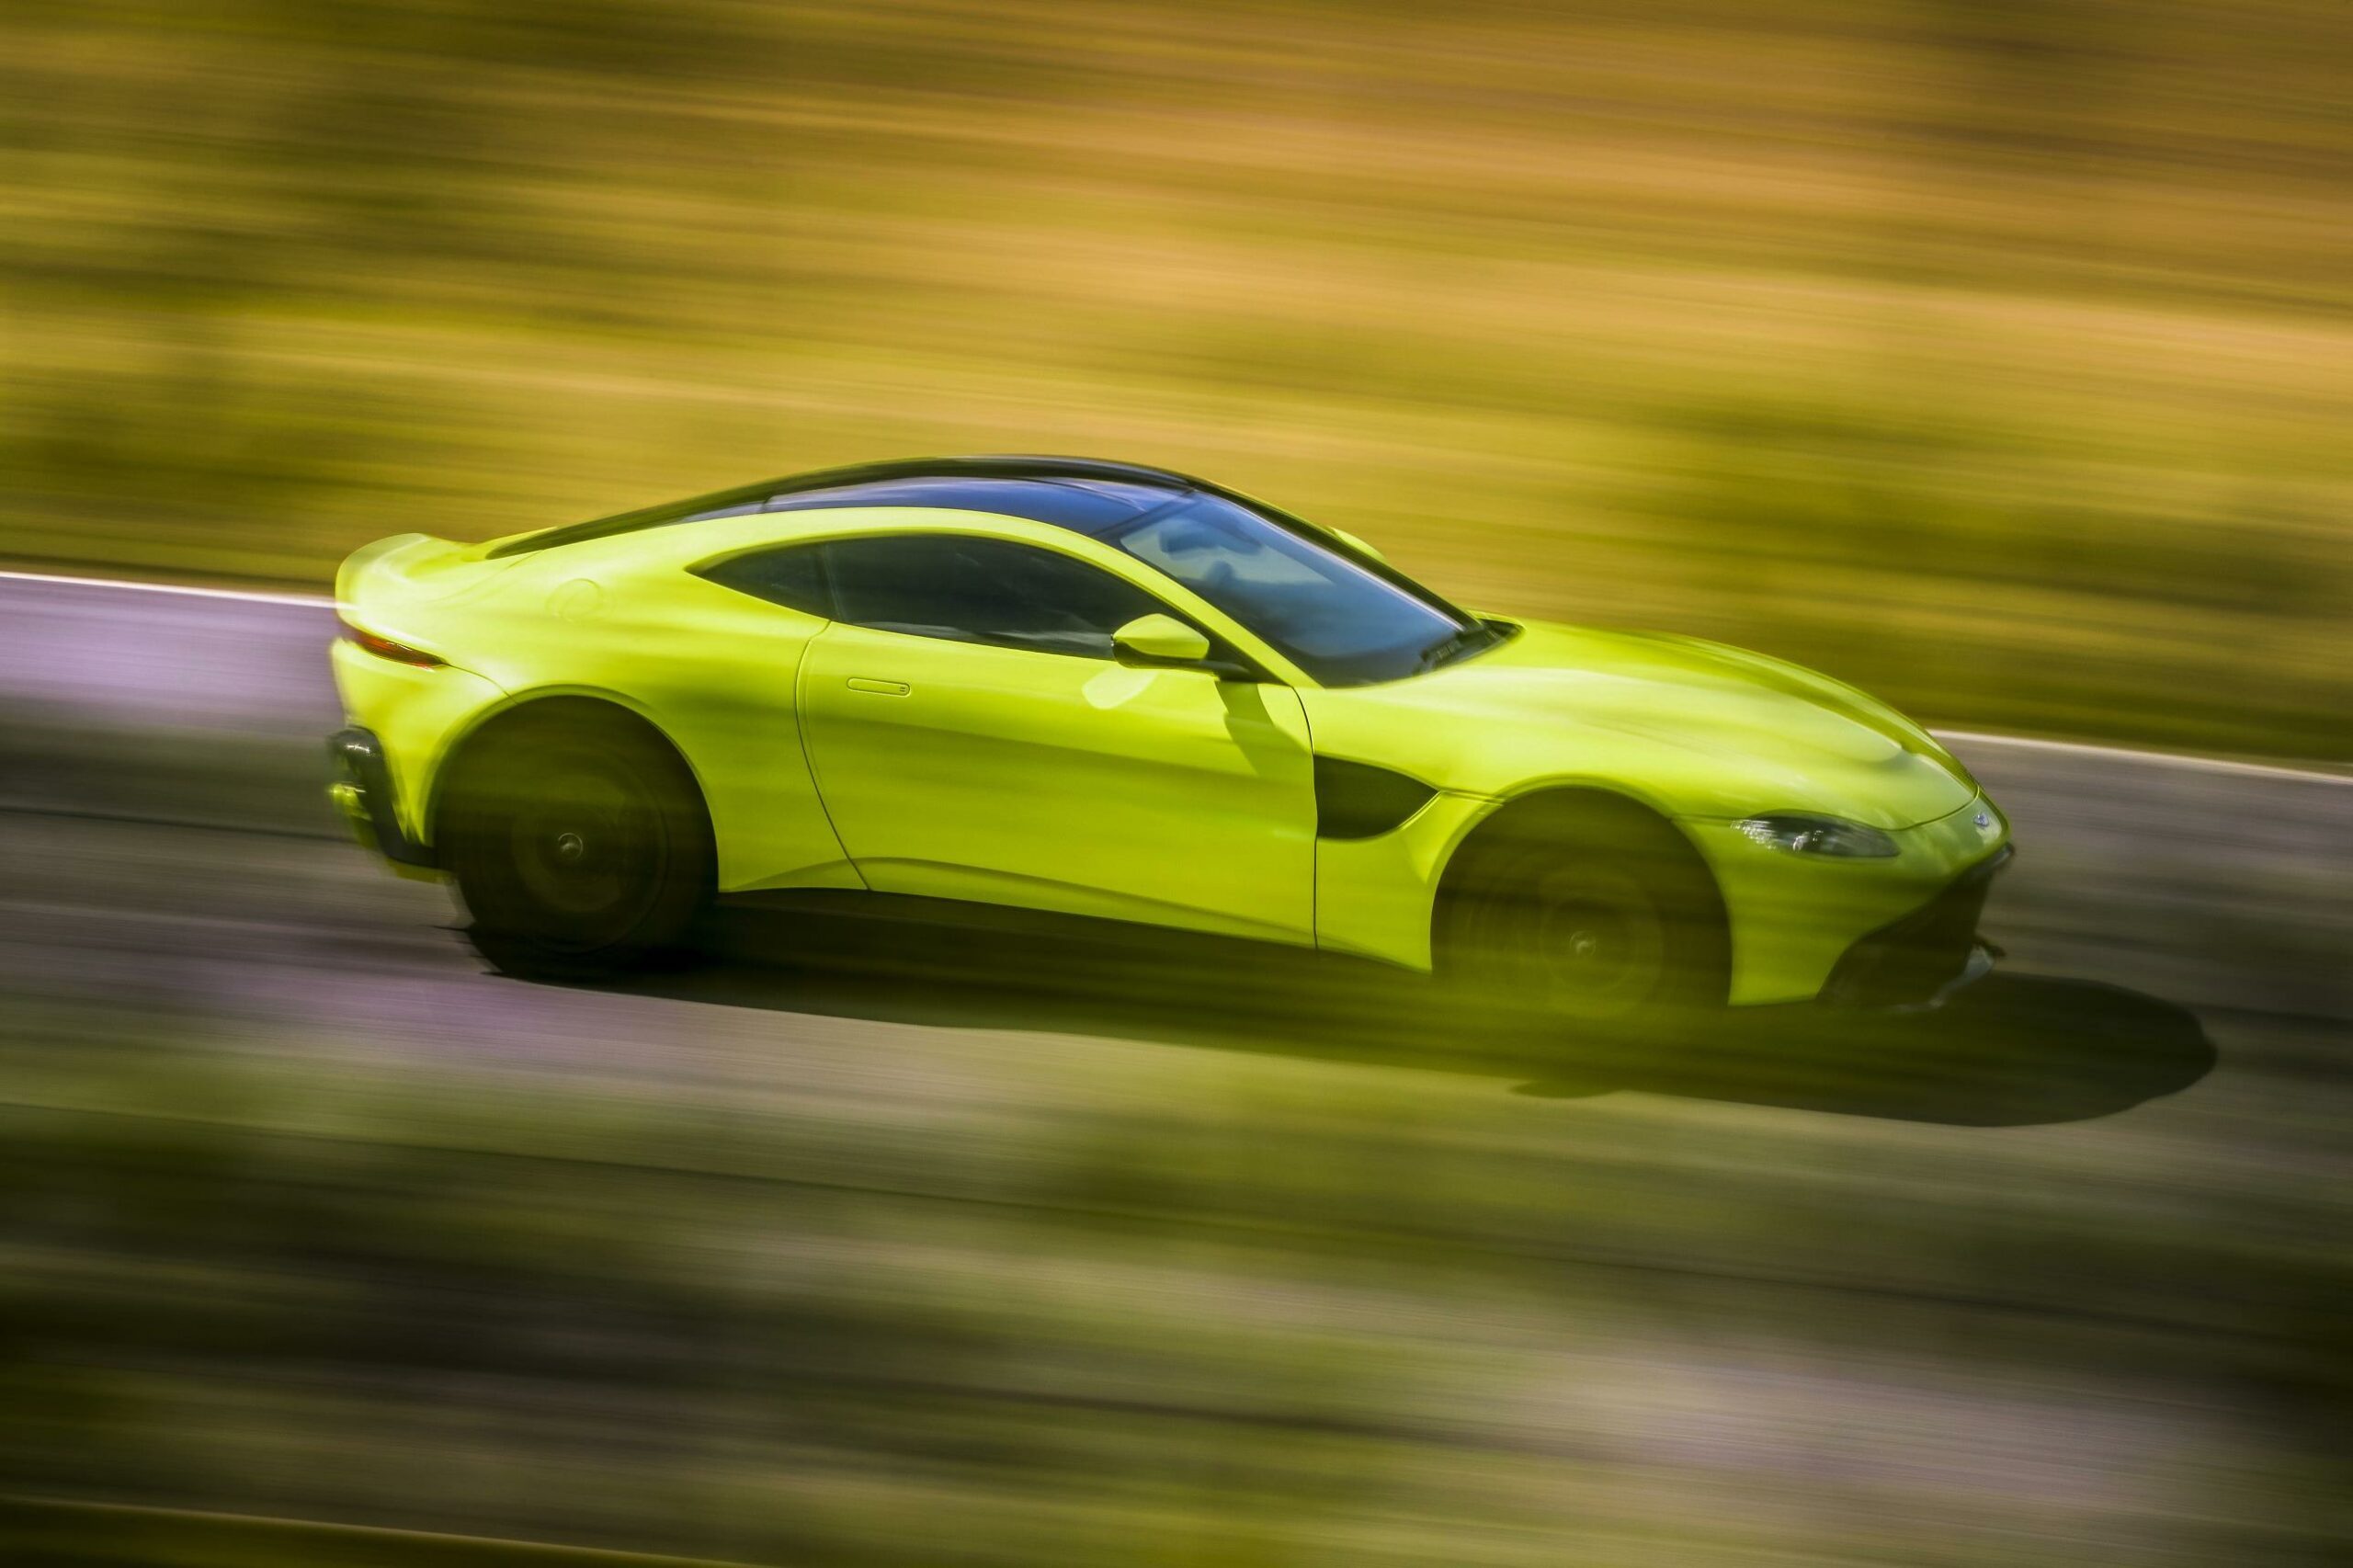 A side view of a neon yellow Aston Martin V8 Vantage driving down a road